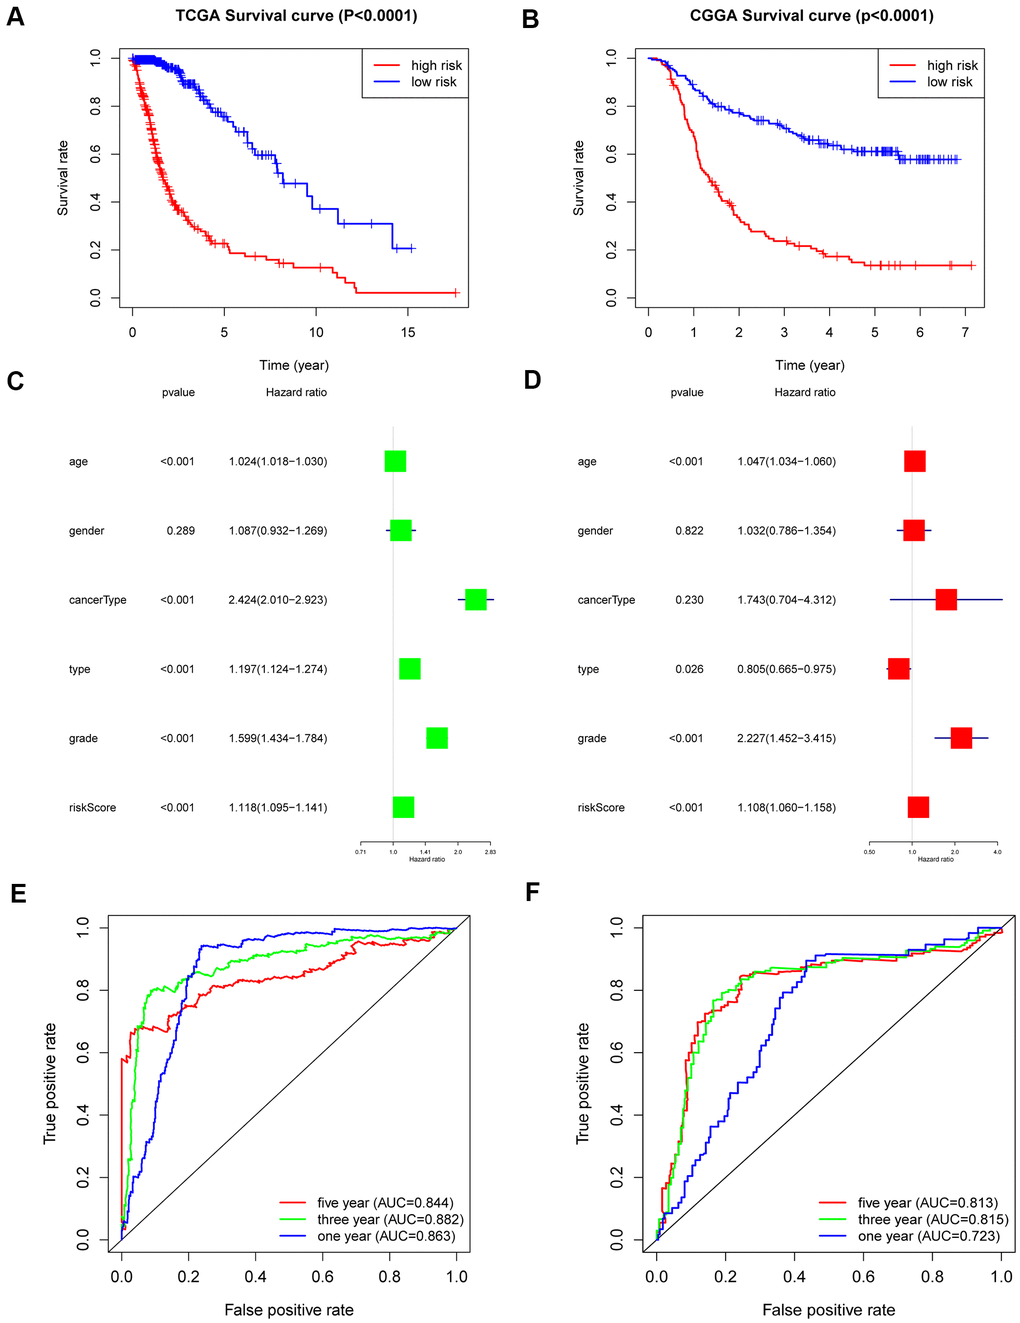 Outcome prediction of the 6-gene signature in stratified patients of the TCGA cohort and CGGA cohort. (A) Kaplan-Meier overall survival analysis between the high- and low-risk groups in the TCGA cohort. (B) Kaplan-Meier overall survival analysis between the high- and low-risk groups in the CGGA cohort. (C, D) Univariate (C) and multivariate Cox regression (D) analyses of clinical features and the 6-gene-based risk score for OS in the TCGA dataset. (E) ROC curves indicating the sensitivity and specificity of predicting 1-, 3- and 5-y survival with the MES-related signature in the TCGA dataset. (F) ROC curves indicating the sensitivity and specificity of predicting 1-, 3- and 5-y survival with the MES-related signature in the CGGA dataset.